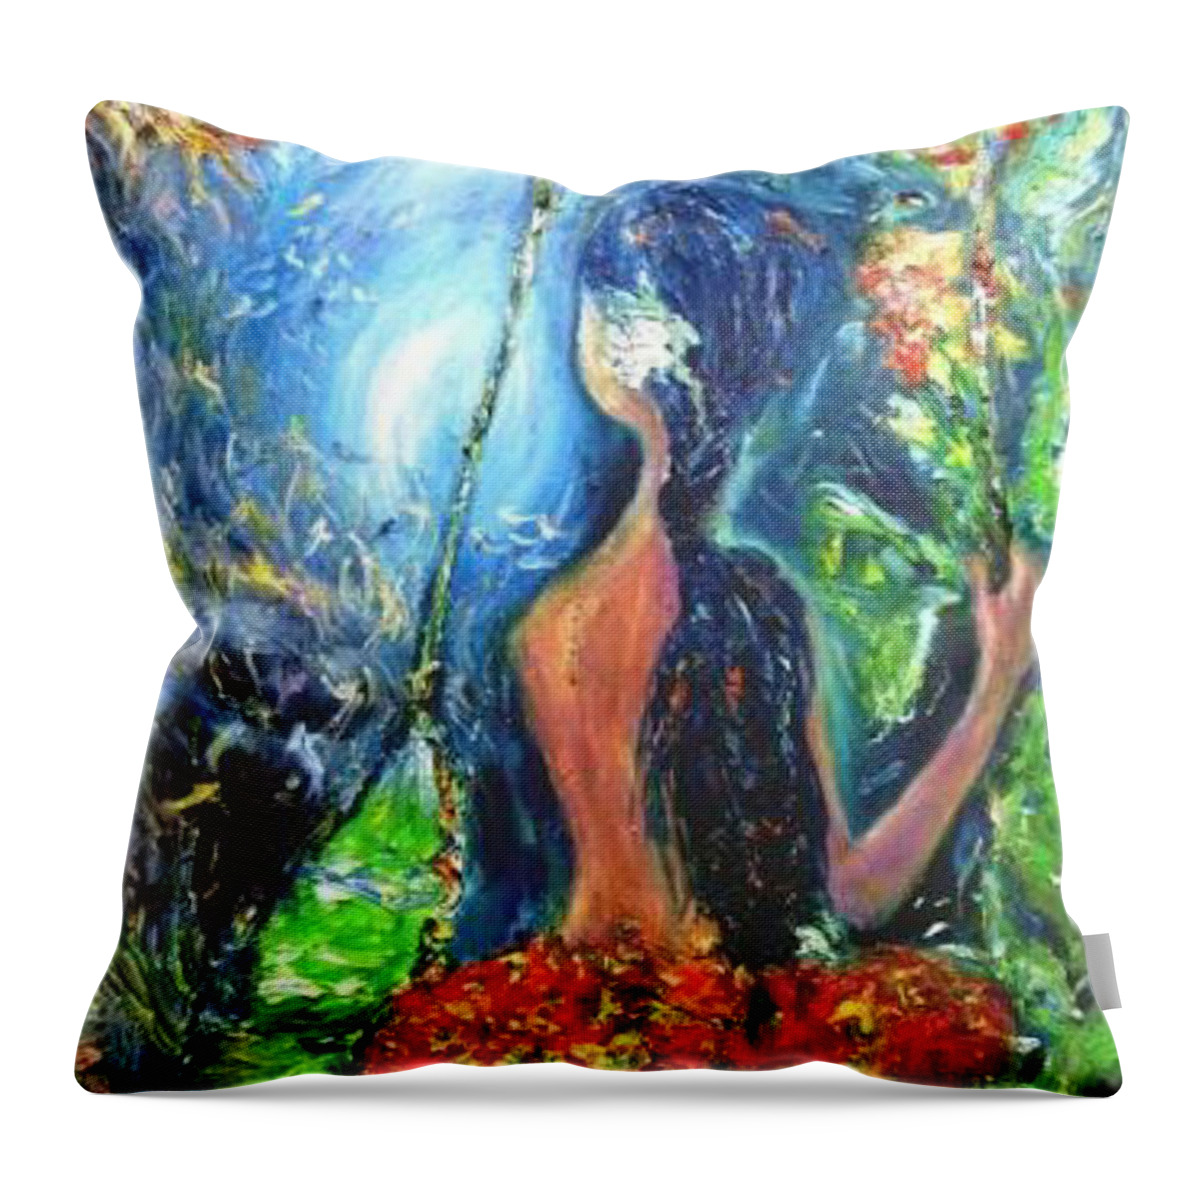  Throw Pillow featuring the painting Under the sea by Wanvisa Klawklean